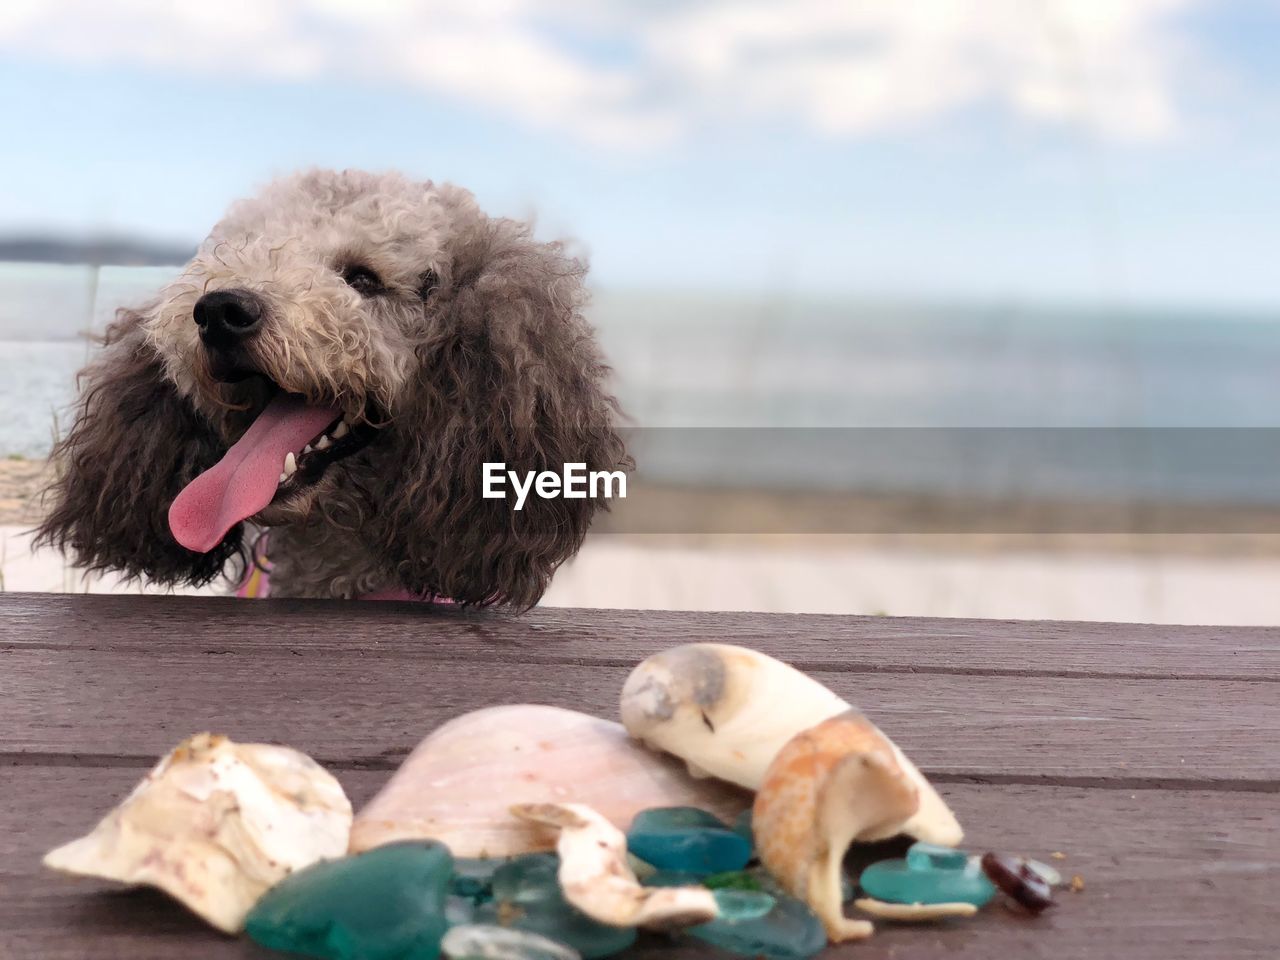 CLOSE-UP OF A DOG ON BEACH AGAINST THE SEA